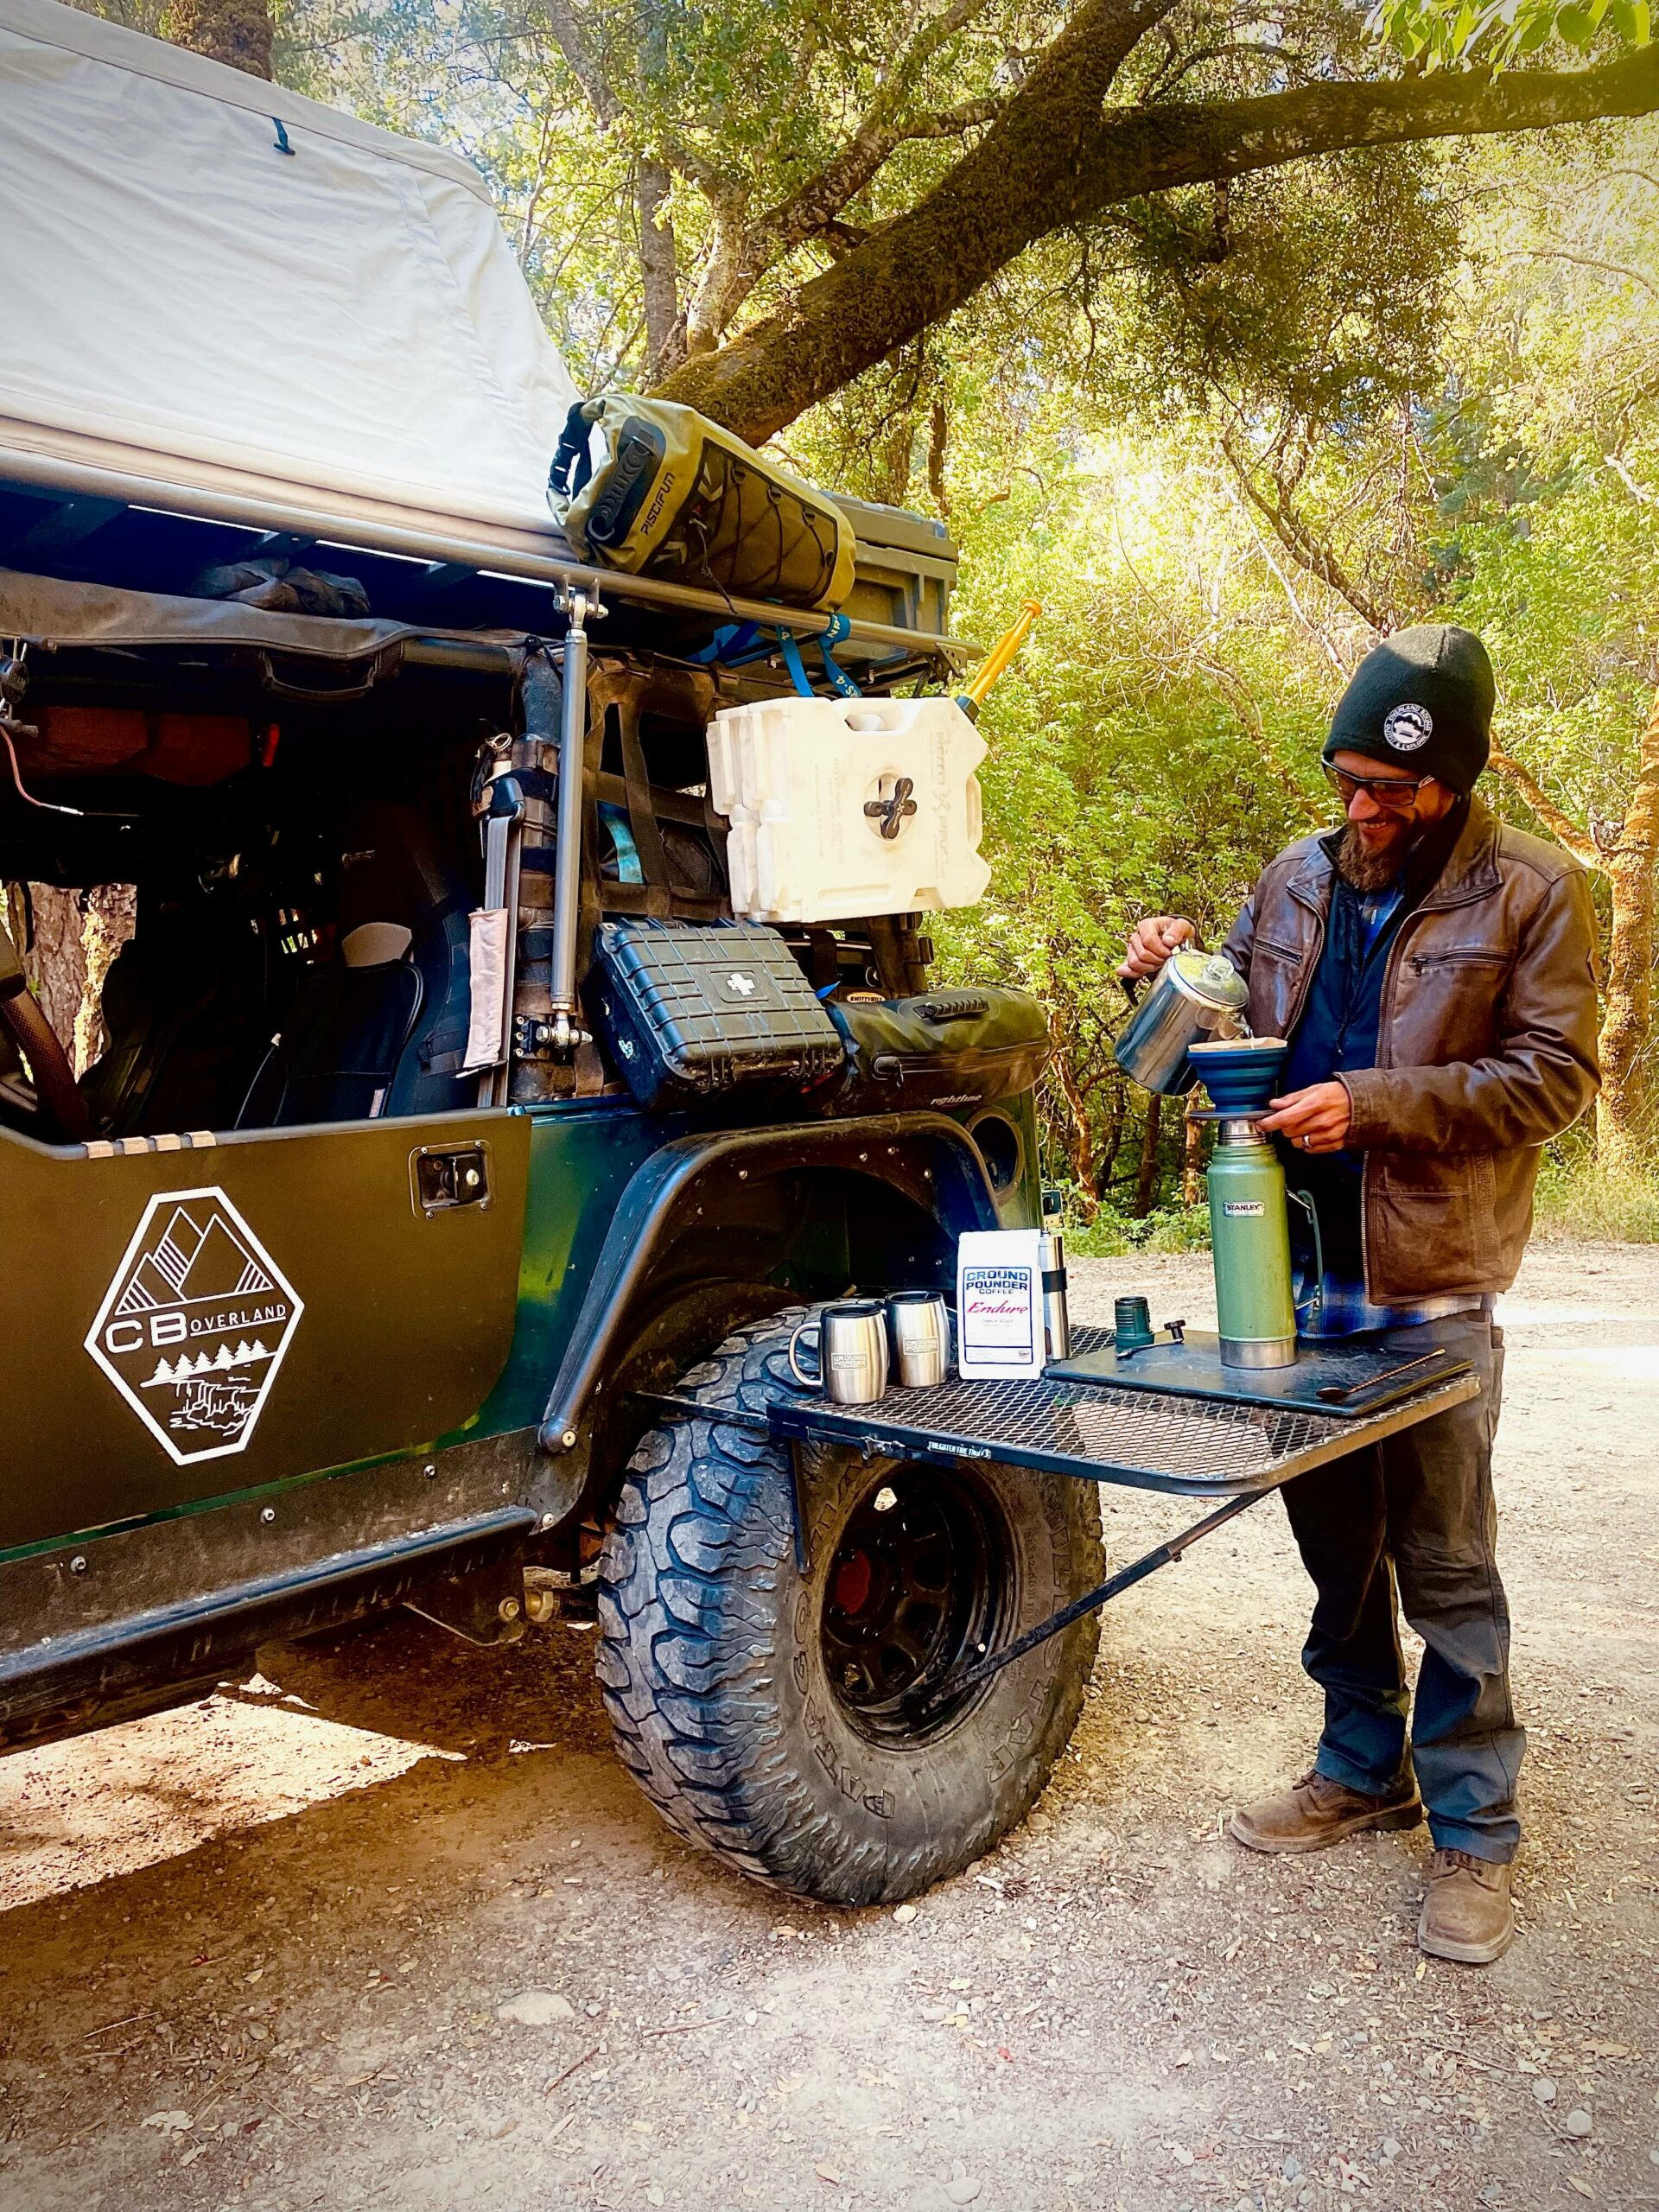 Blake pours coffee next to his overlanding jeep.